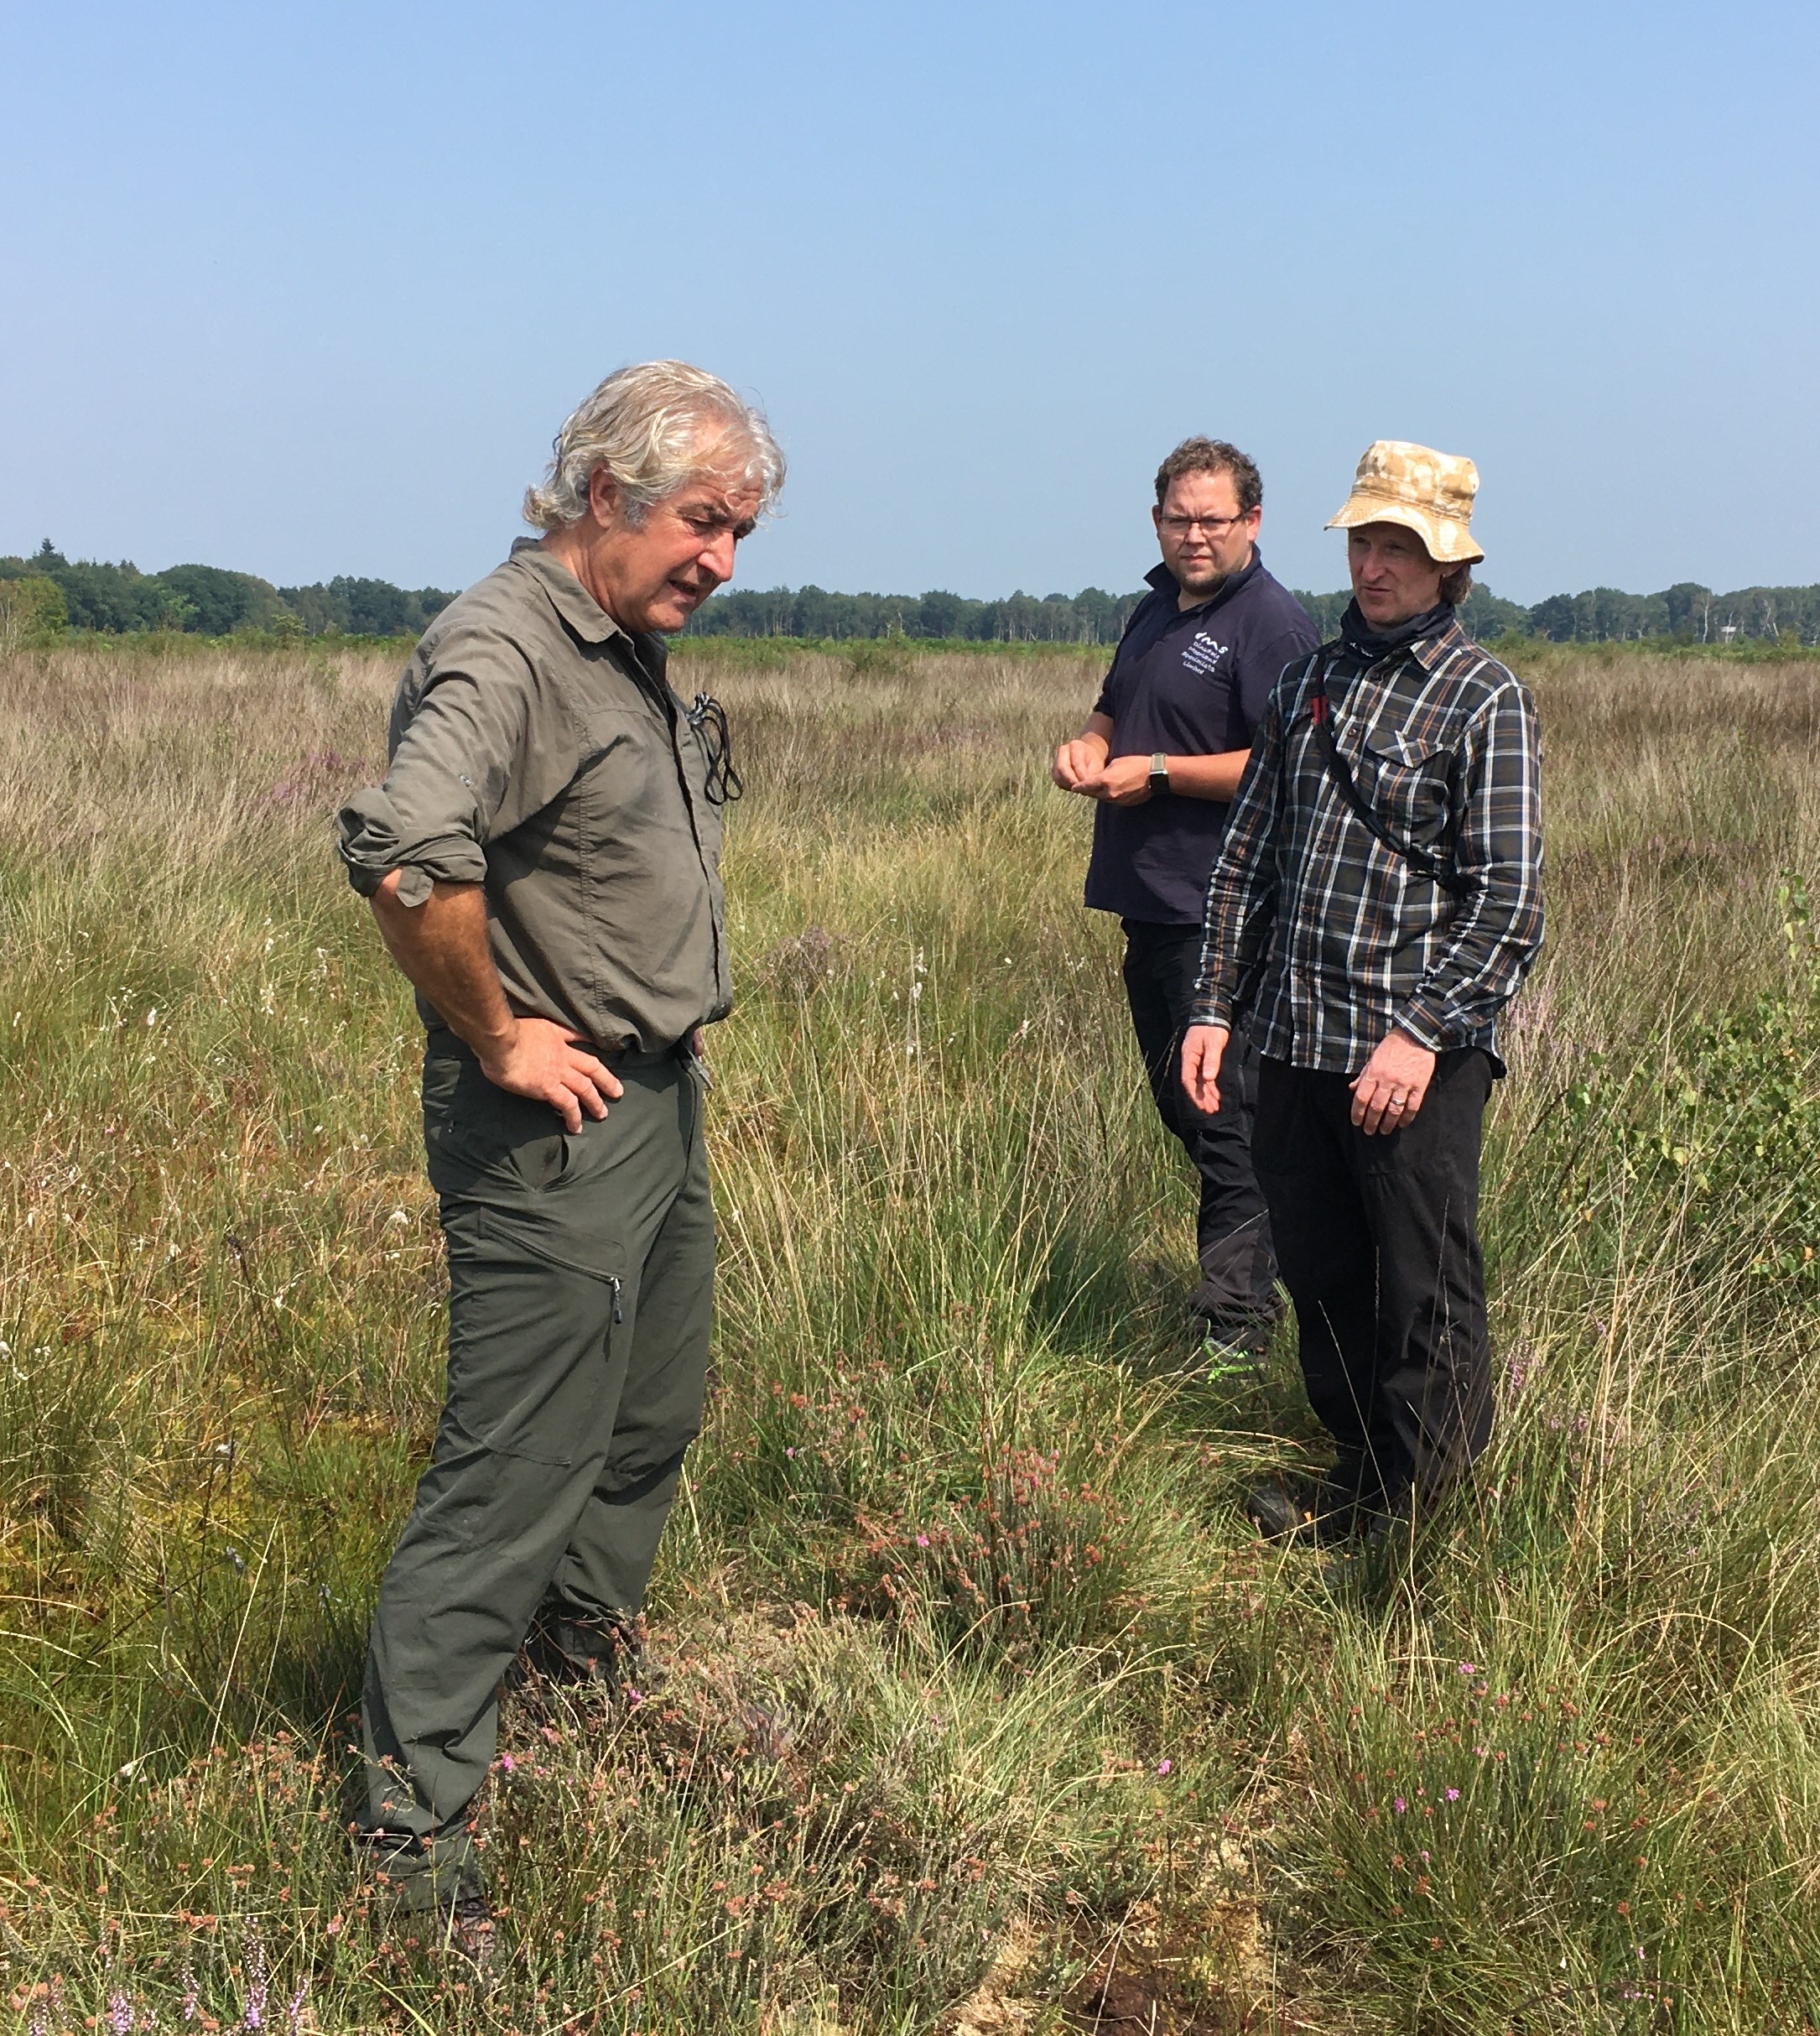 Tony Juniper, Head of Natural England, with the NE Marches Mosses Team on the Mosses